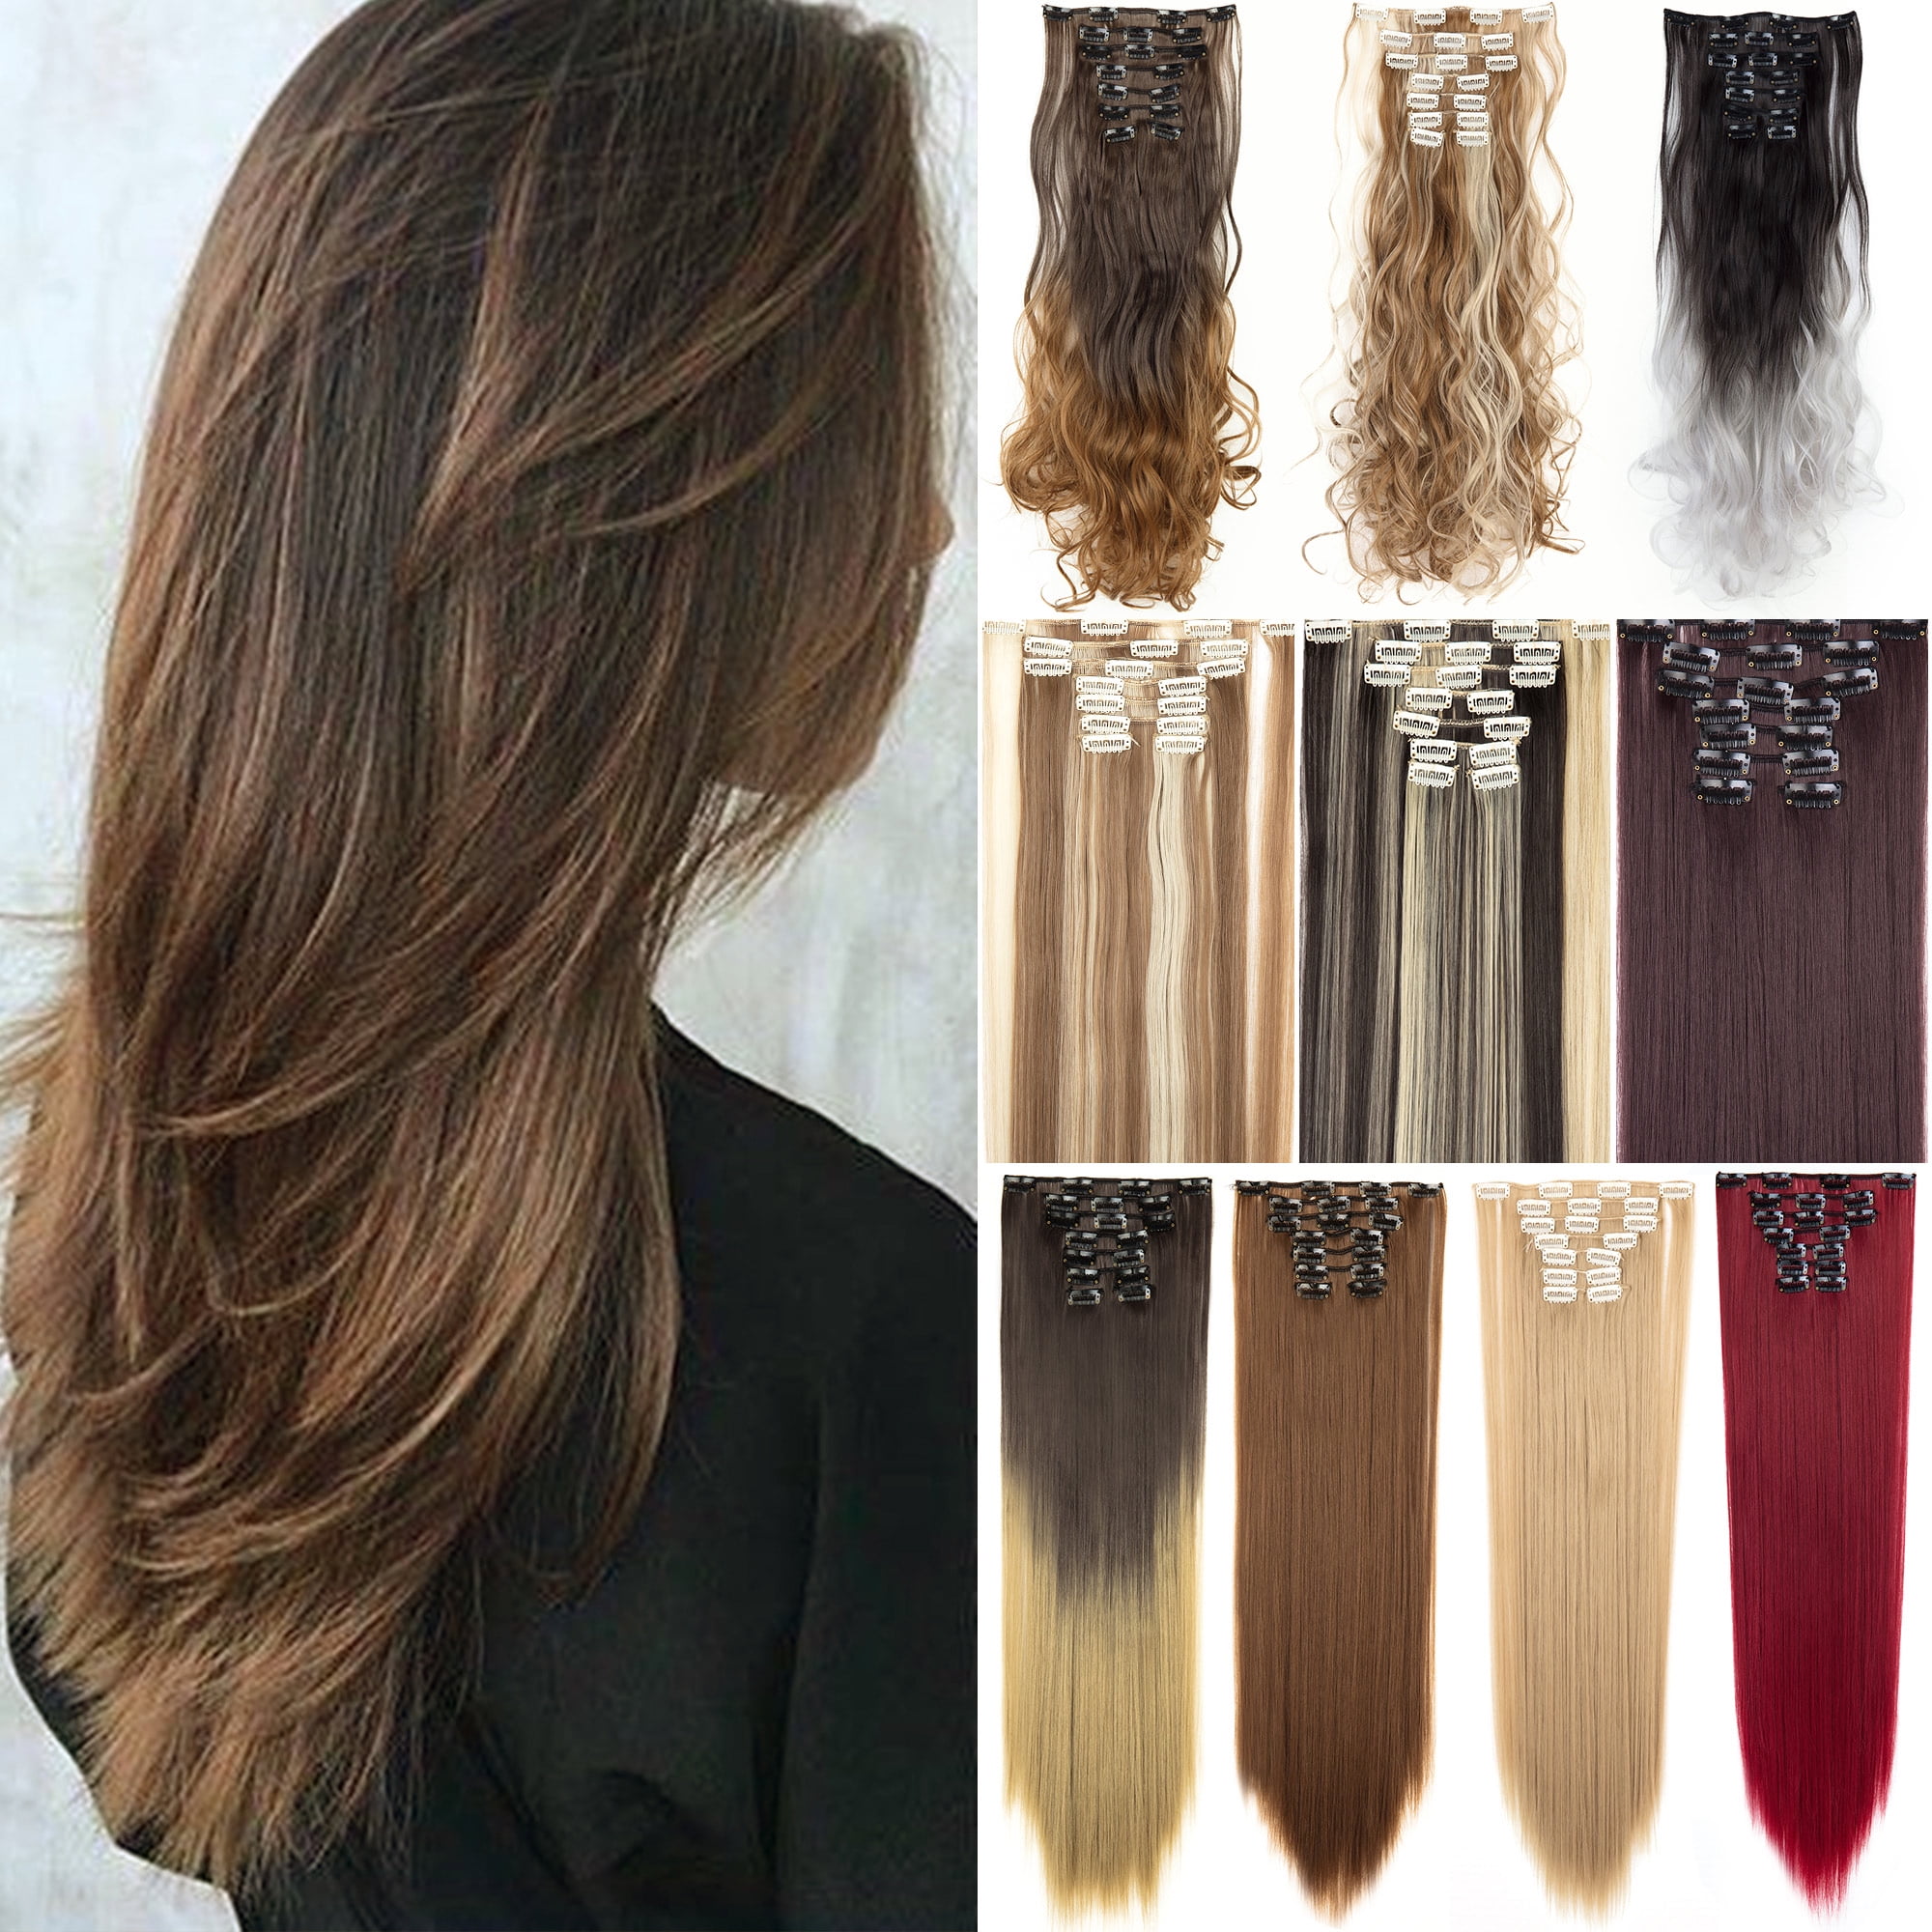 Extra Long Hair Extension Holder Without Hanger, Portable Storage